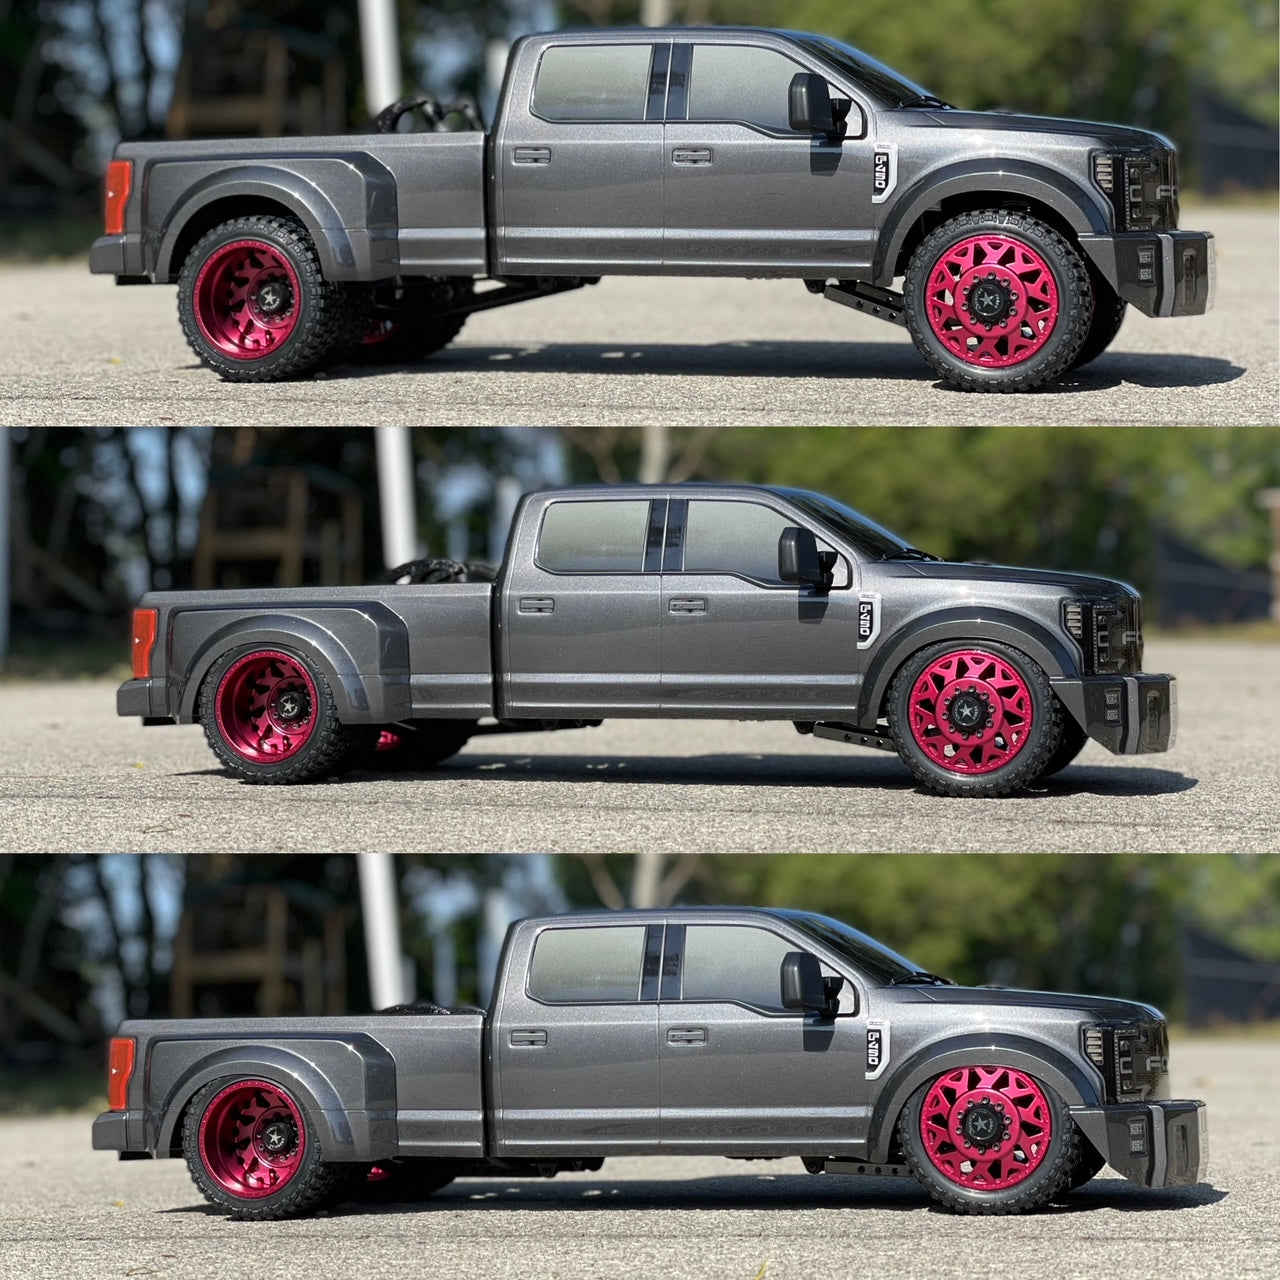 New 2023 Lowering Kit: Now Even LOWER! for CEN Racing F450 AMERICAN FORCE Edition Wheels Only (Truck Not Included)